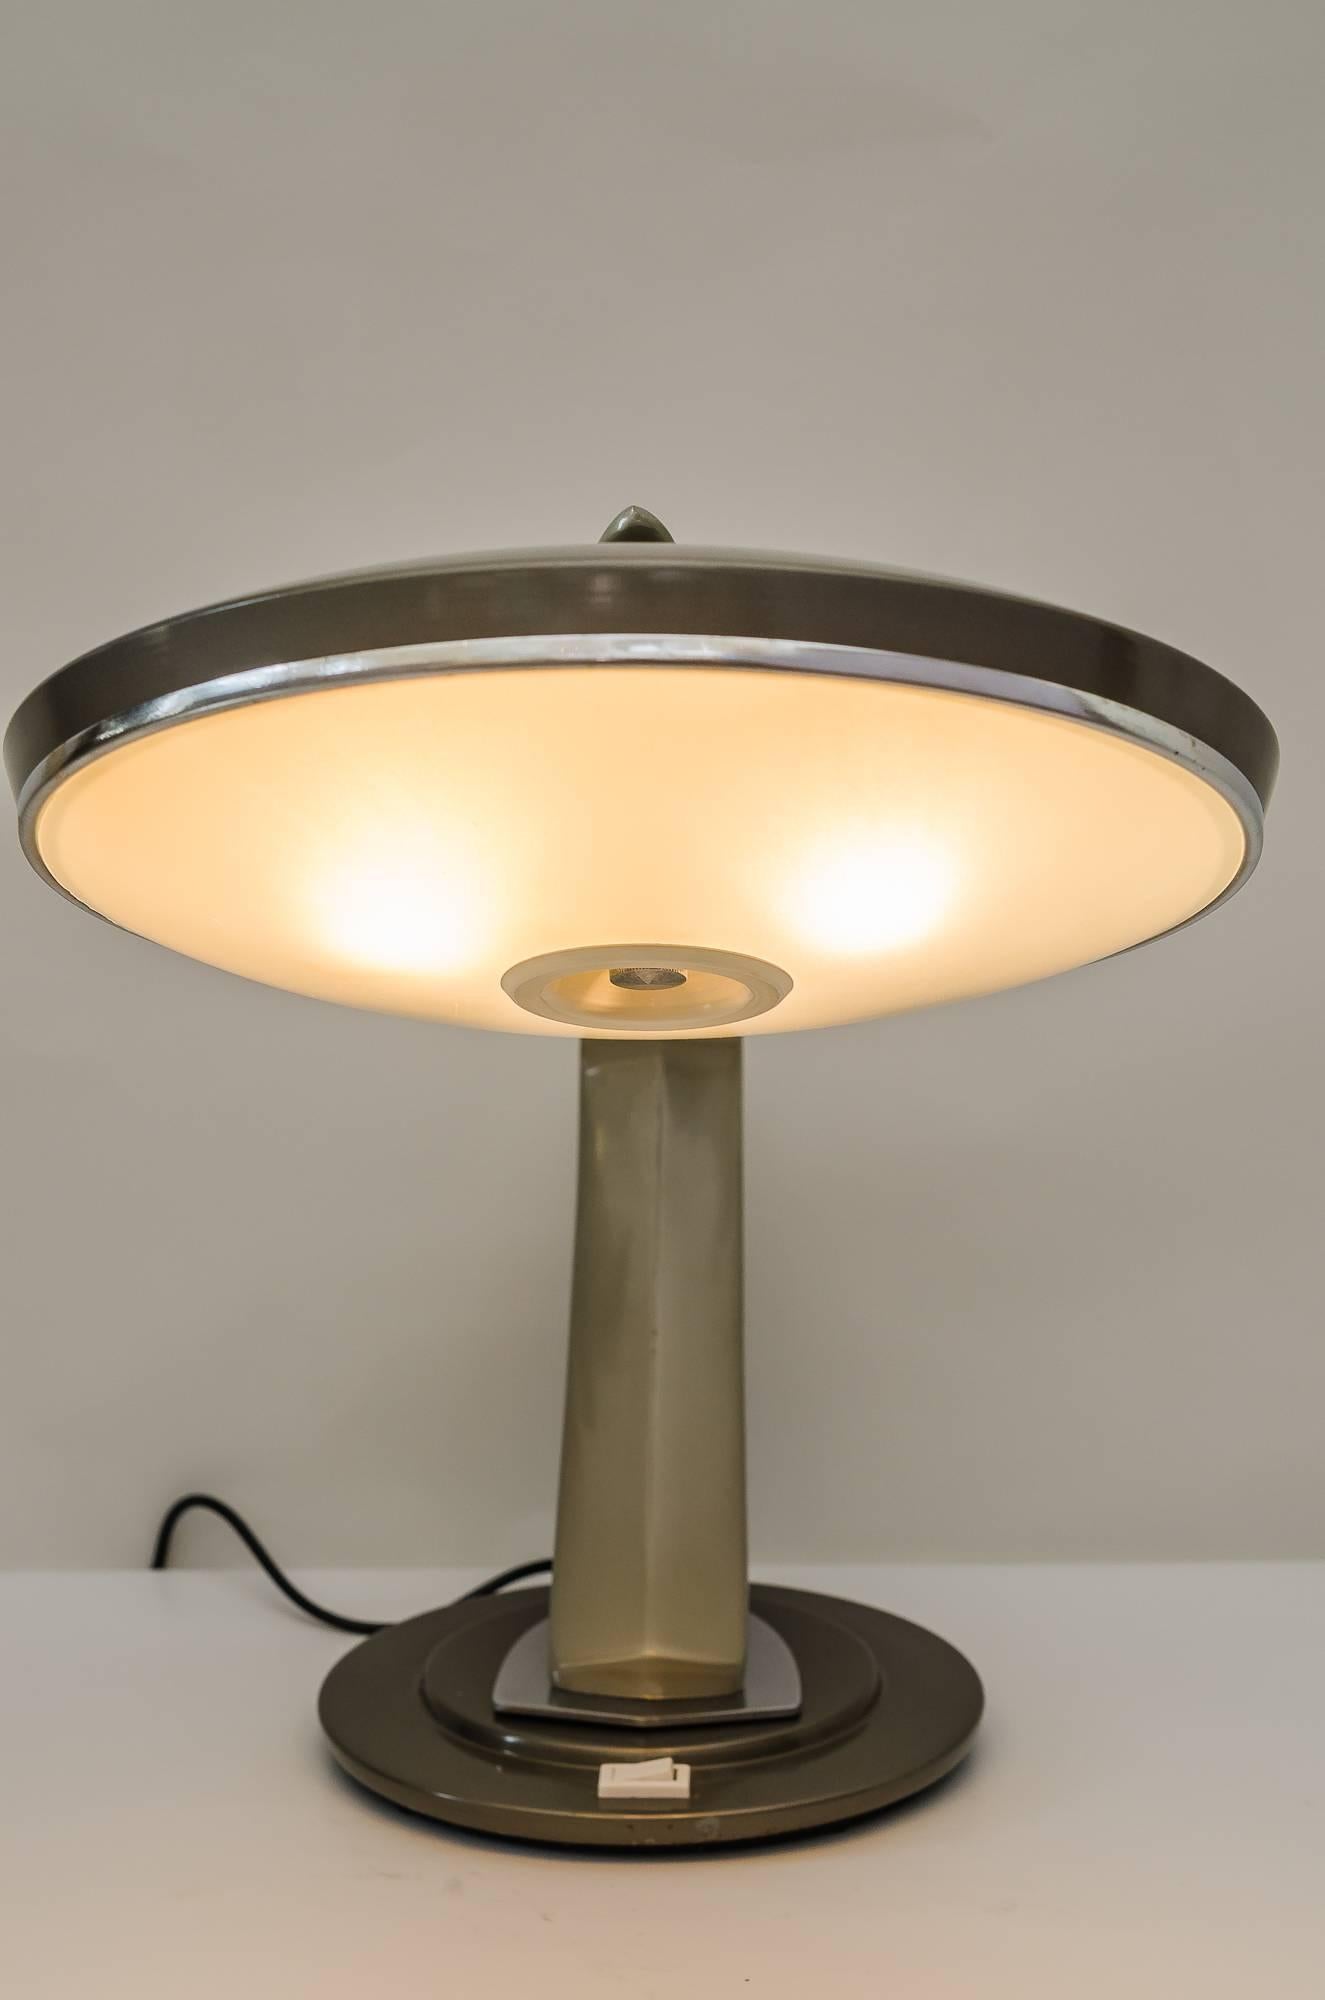 Mid-20th Century Table Lamp Raptek Milano, 1950s For Sale